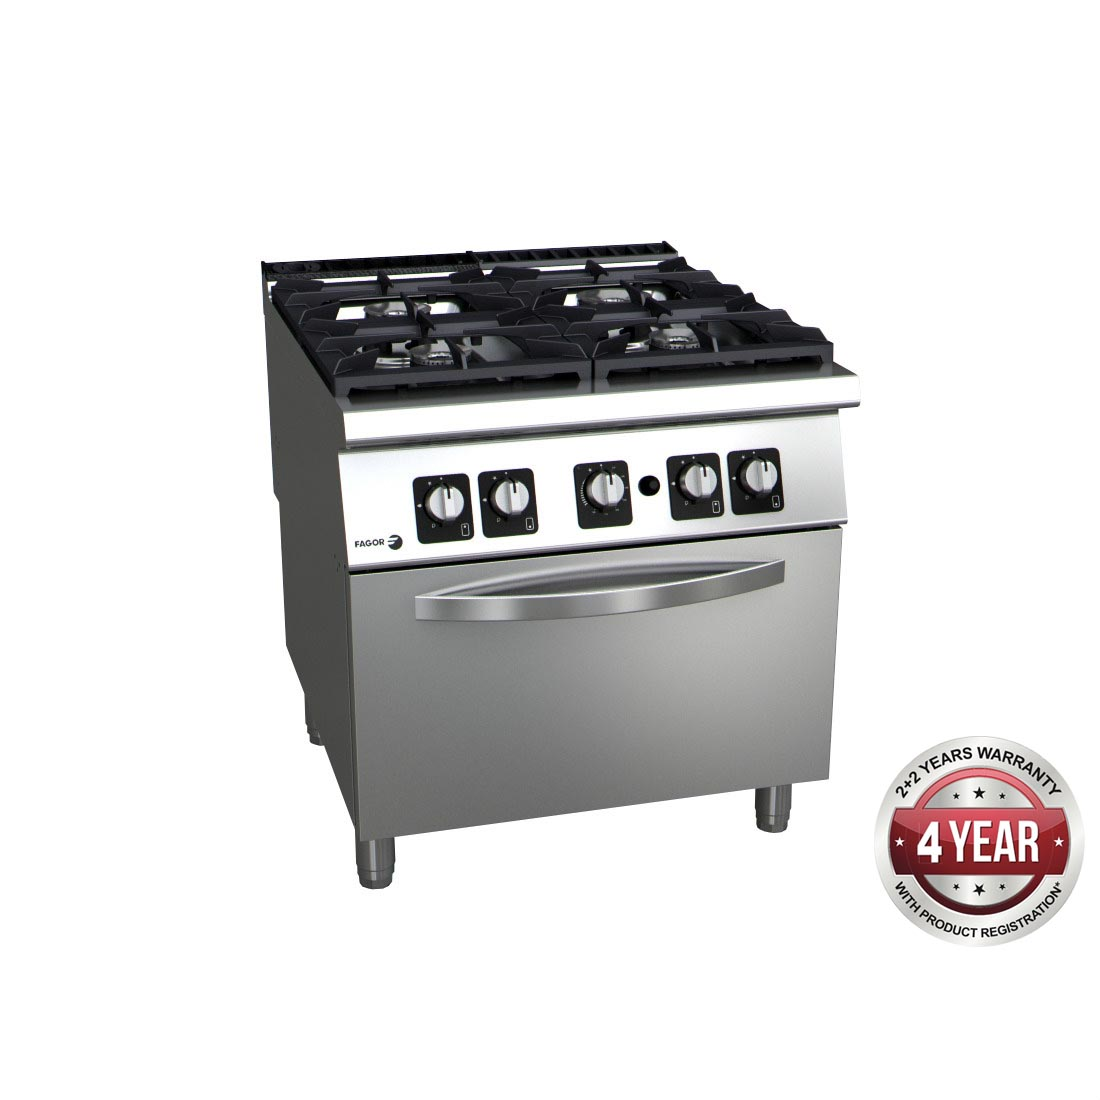 Fagor 900 Series Gas 4 Burner with Gas Oven - C-G941H